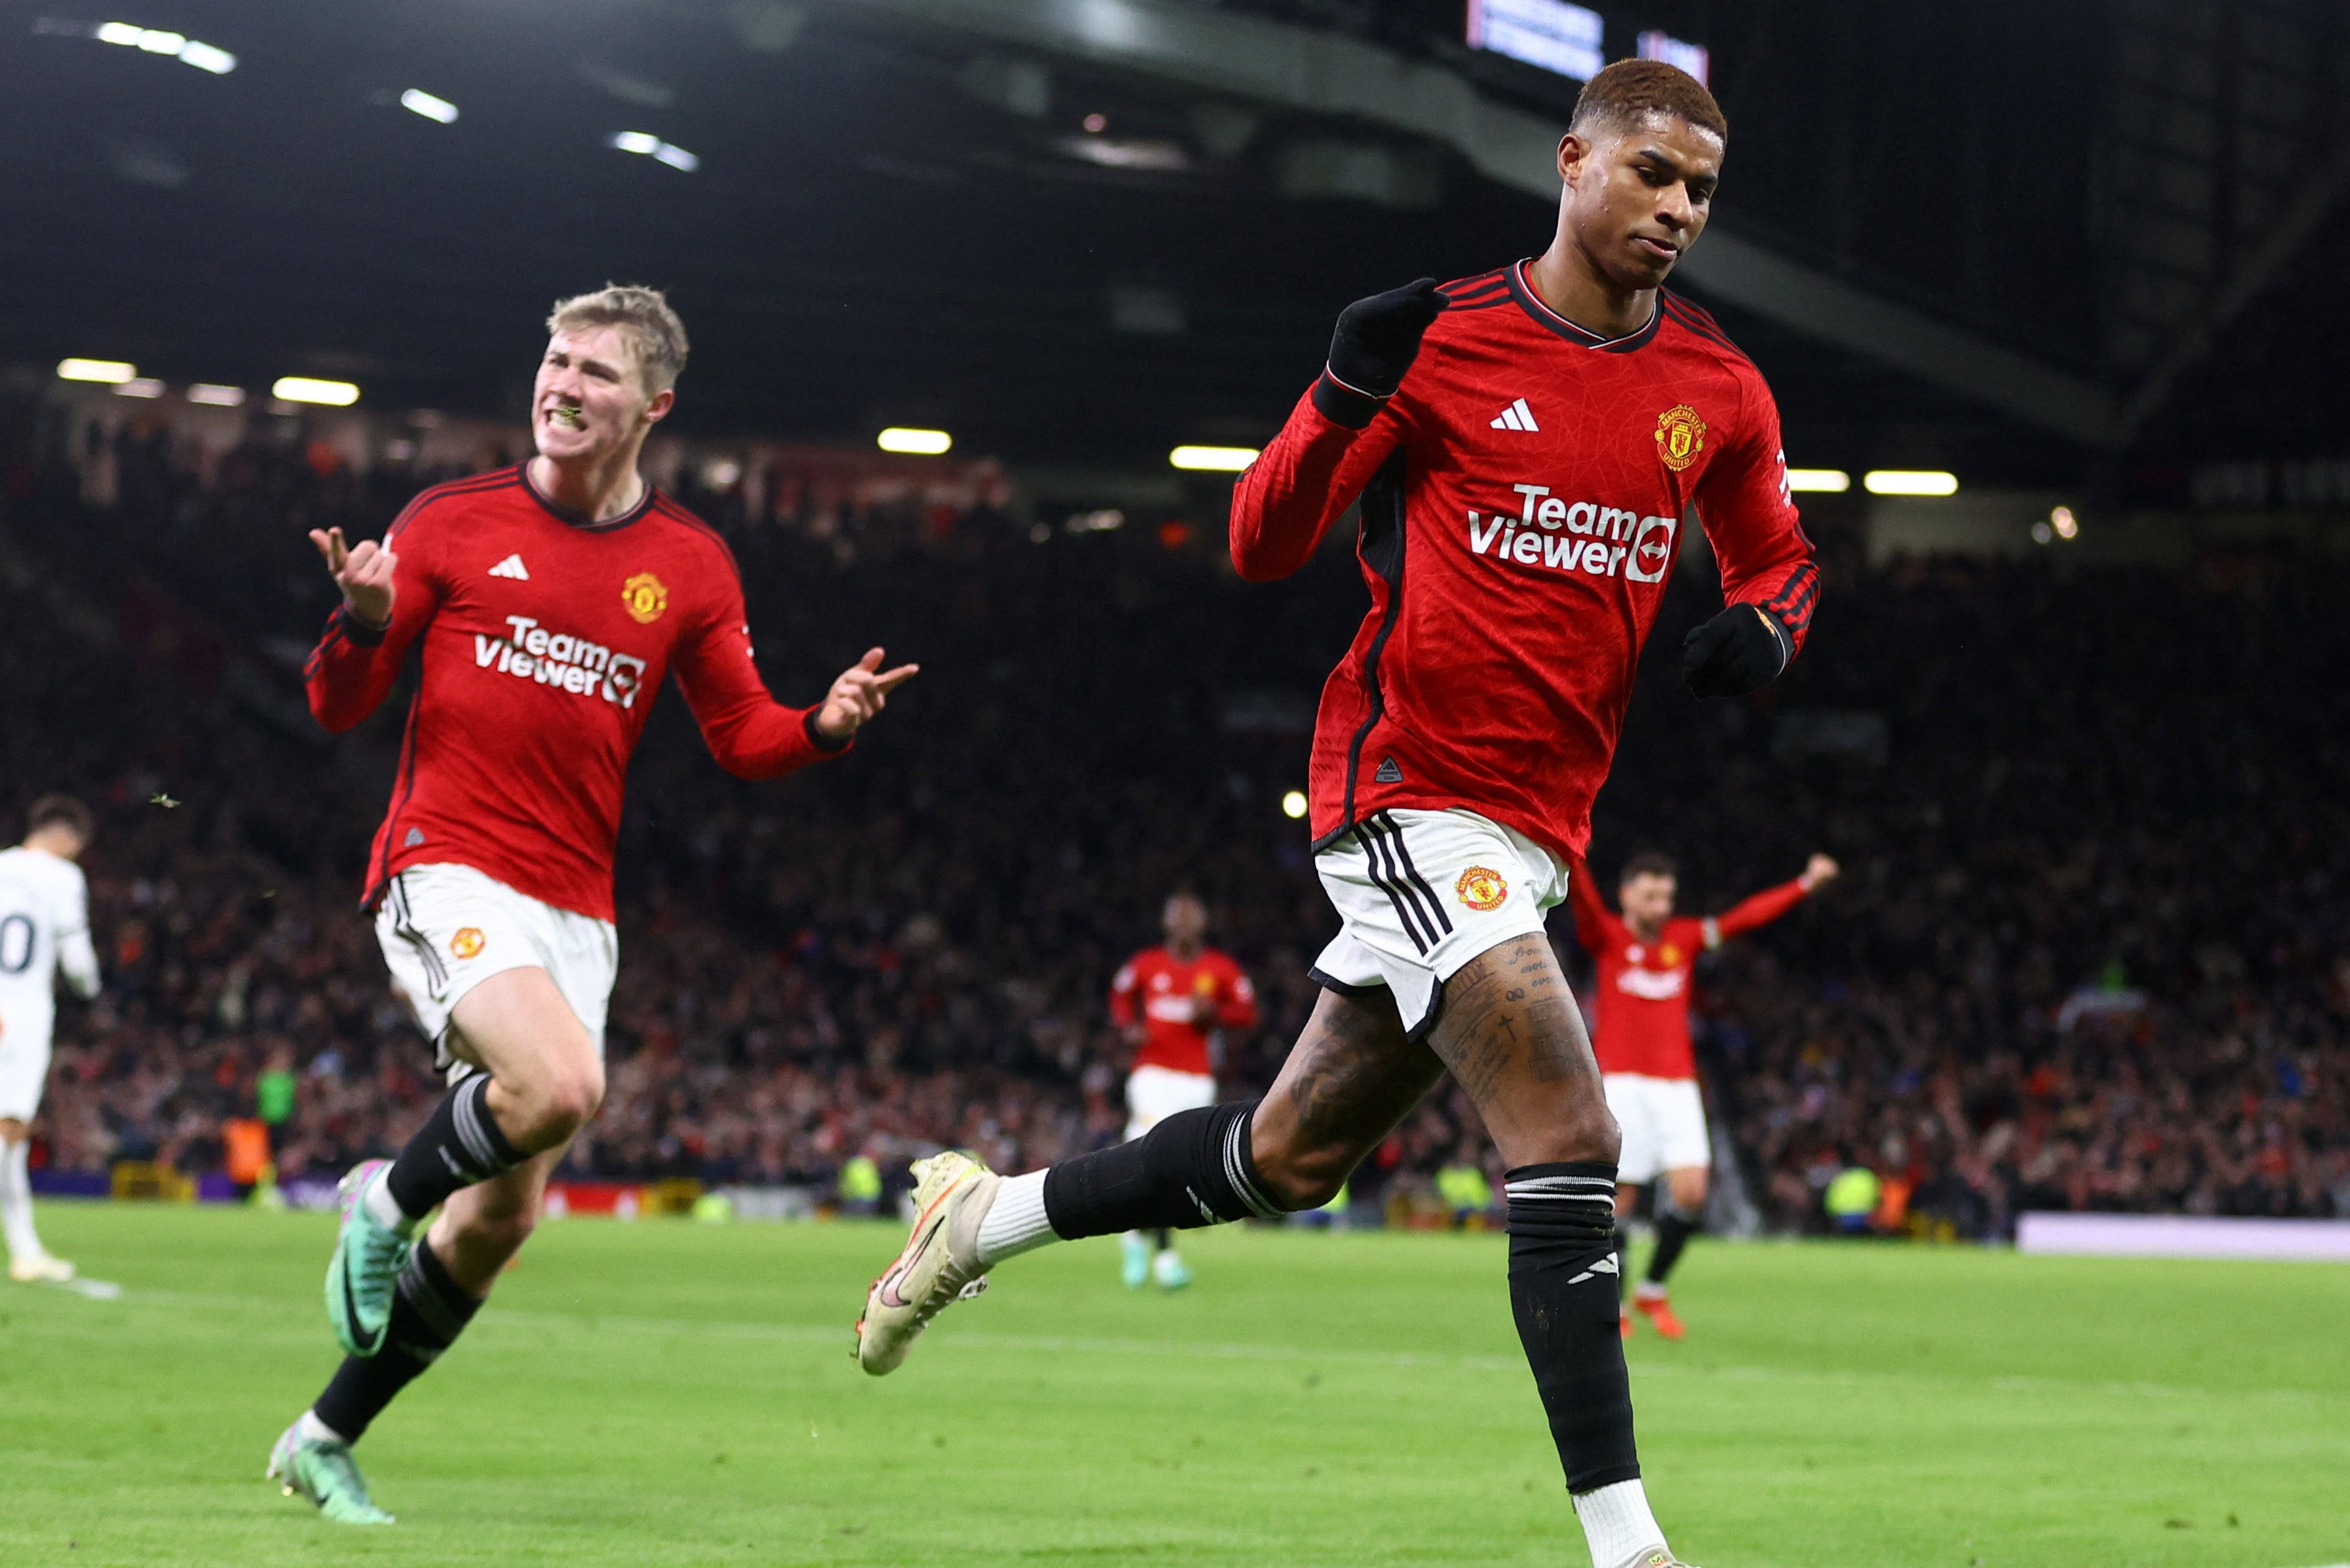 With a hefty price tag on the Dane and fans expecting better from Rashford, both players will hope the weekend’s performance is a sign of things to come